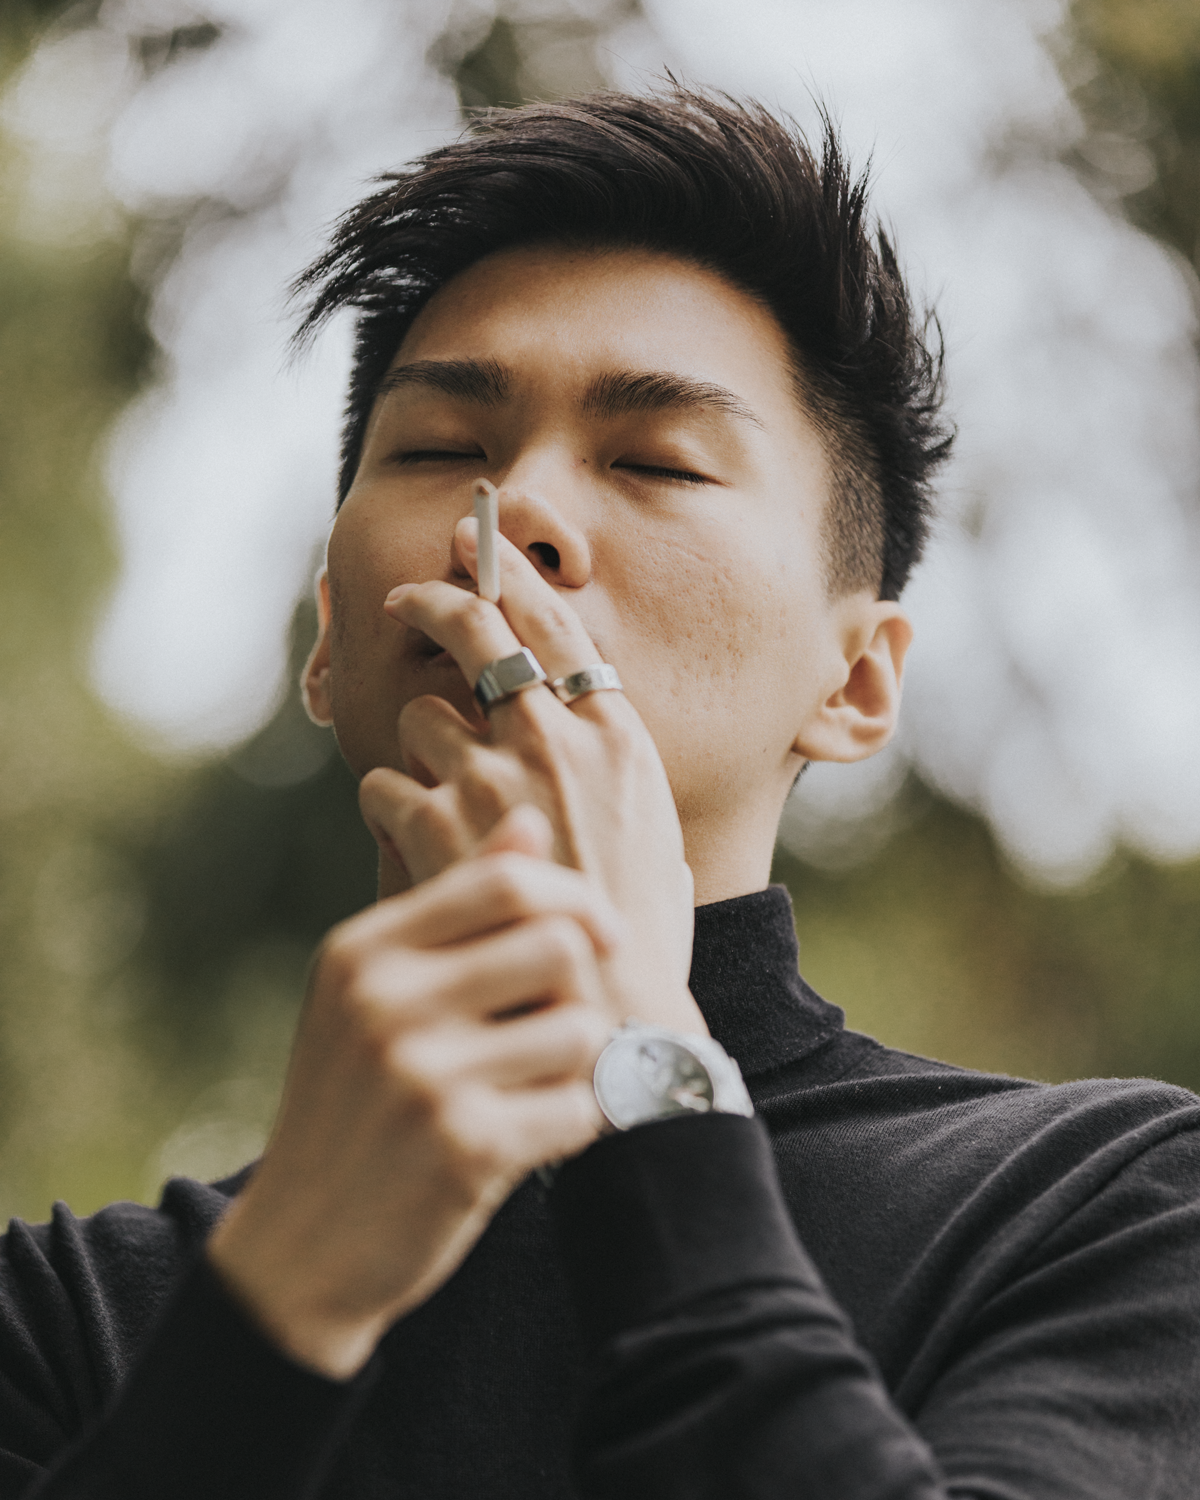 Colour photograph of a self-portrait of the artist placing an unlit cigarette in their mouth as they clutch their wrist in an outdoor environment.